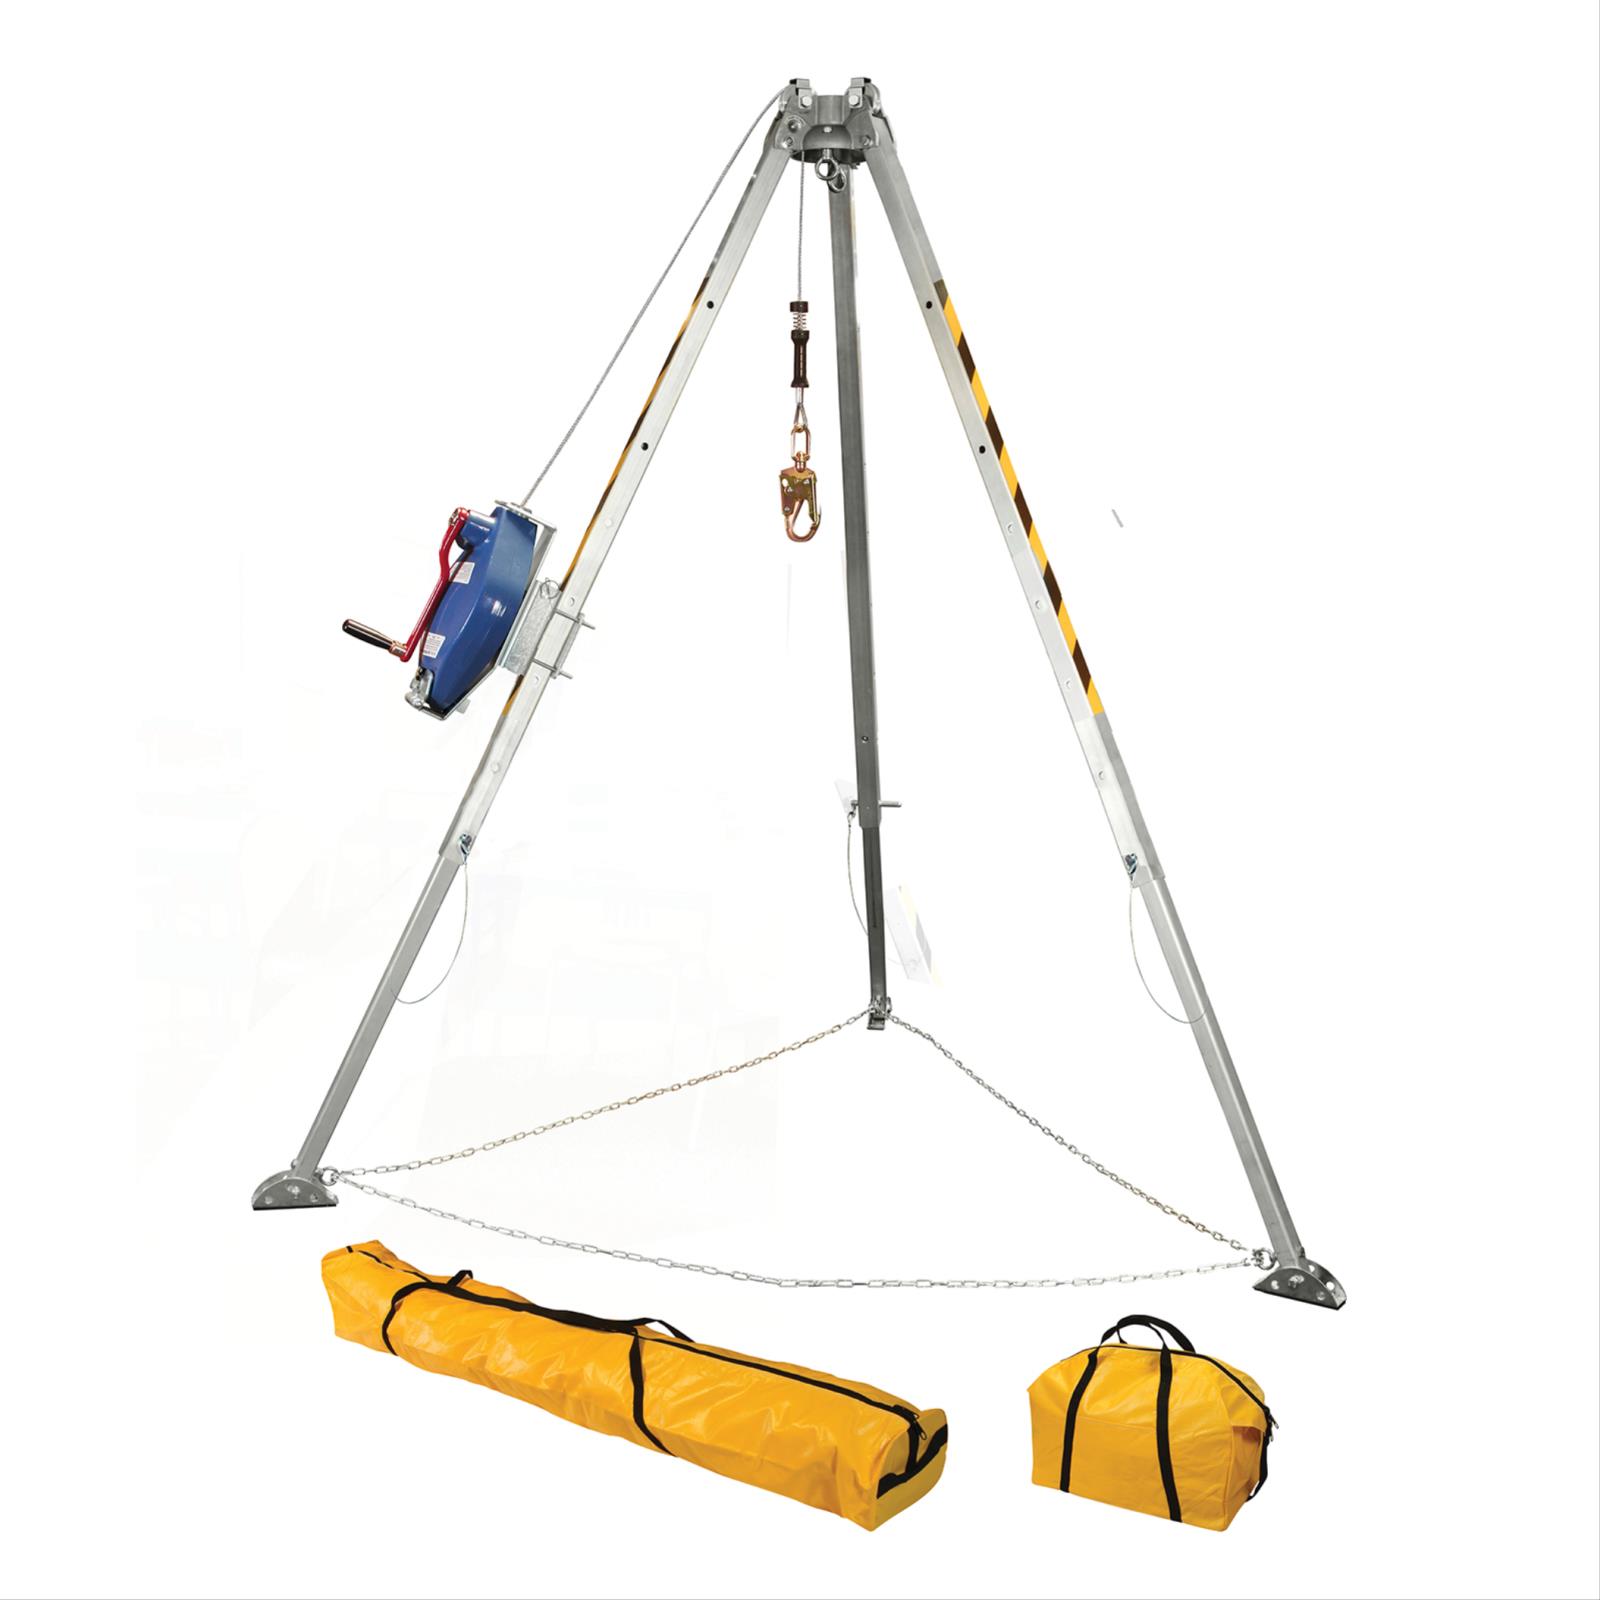 Confined Space Tripod System